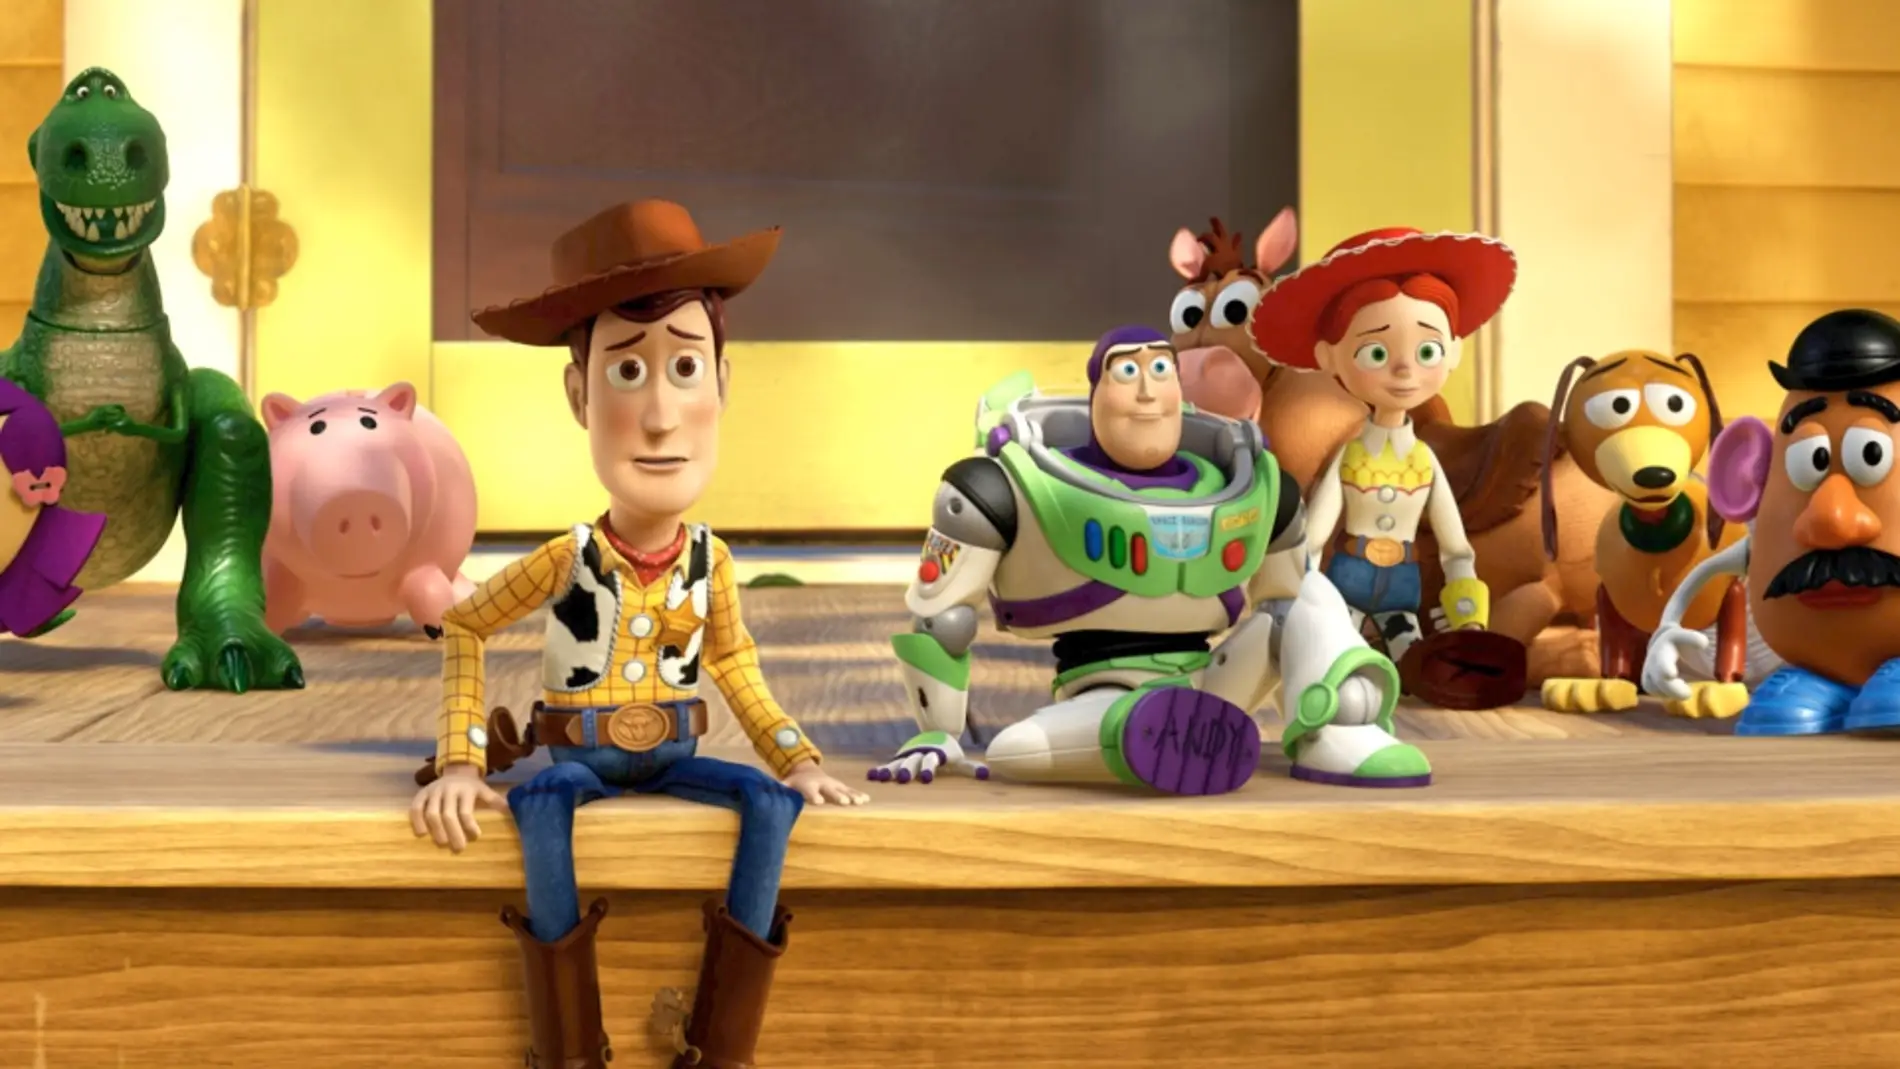 'Toy Story 4'